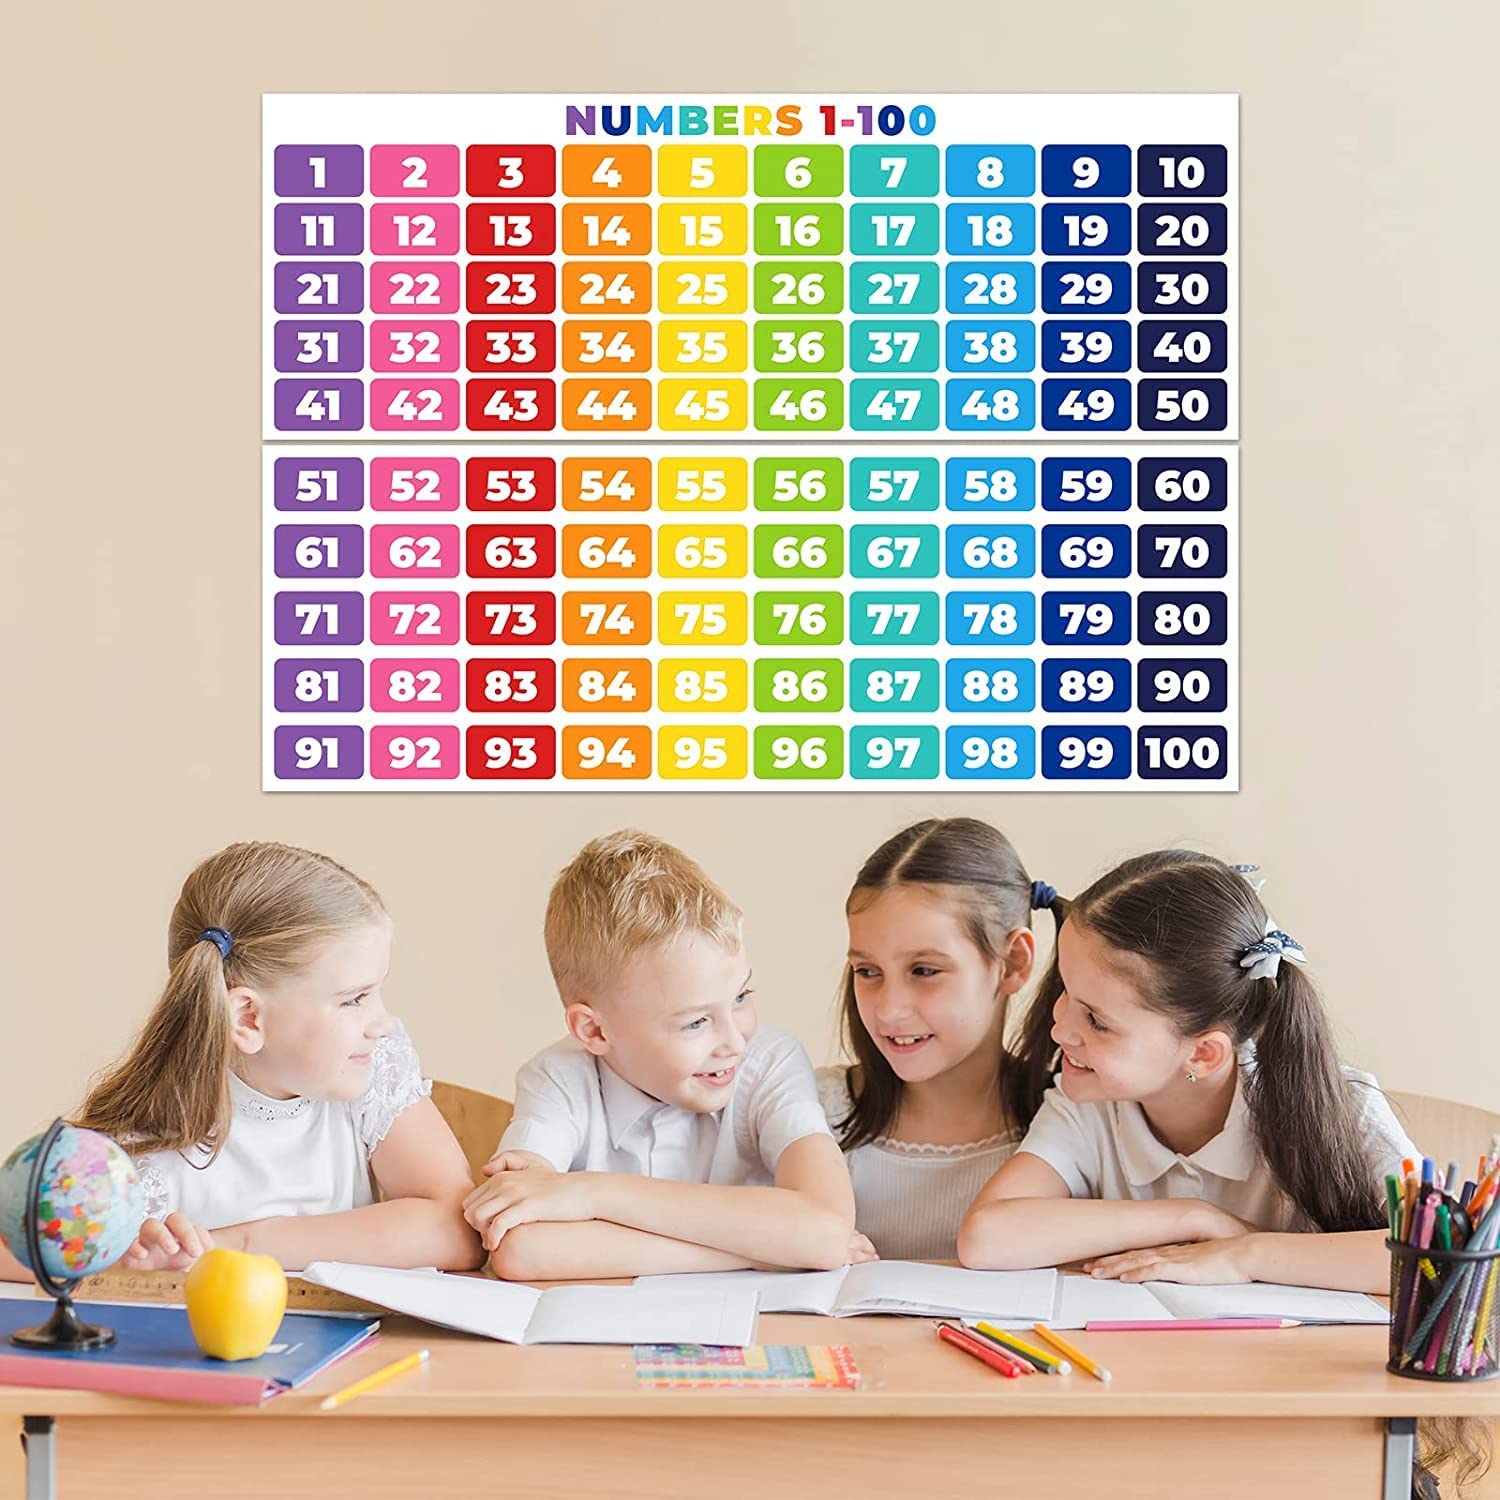 Poster for school and children's room decor, designed with numbers 1-100